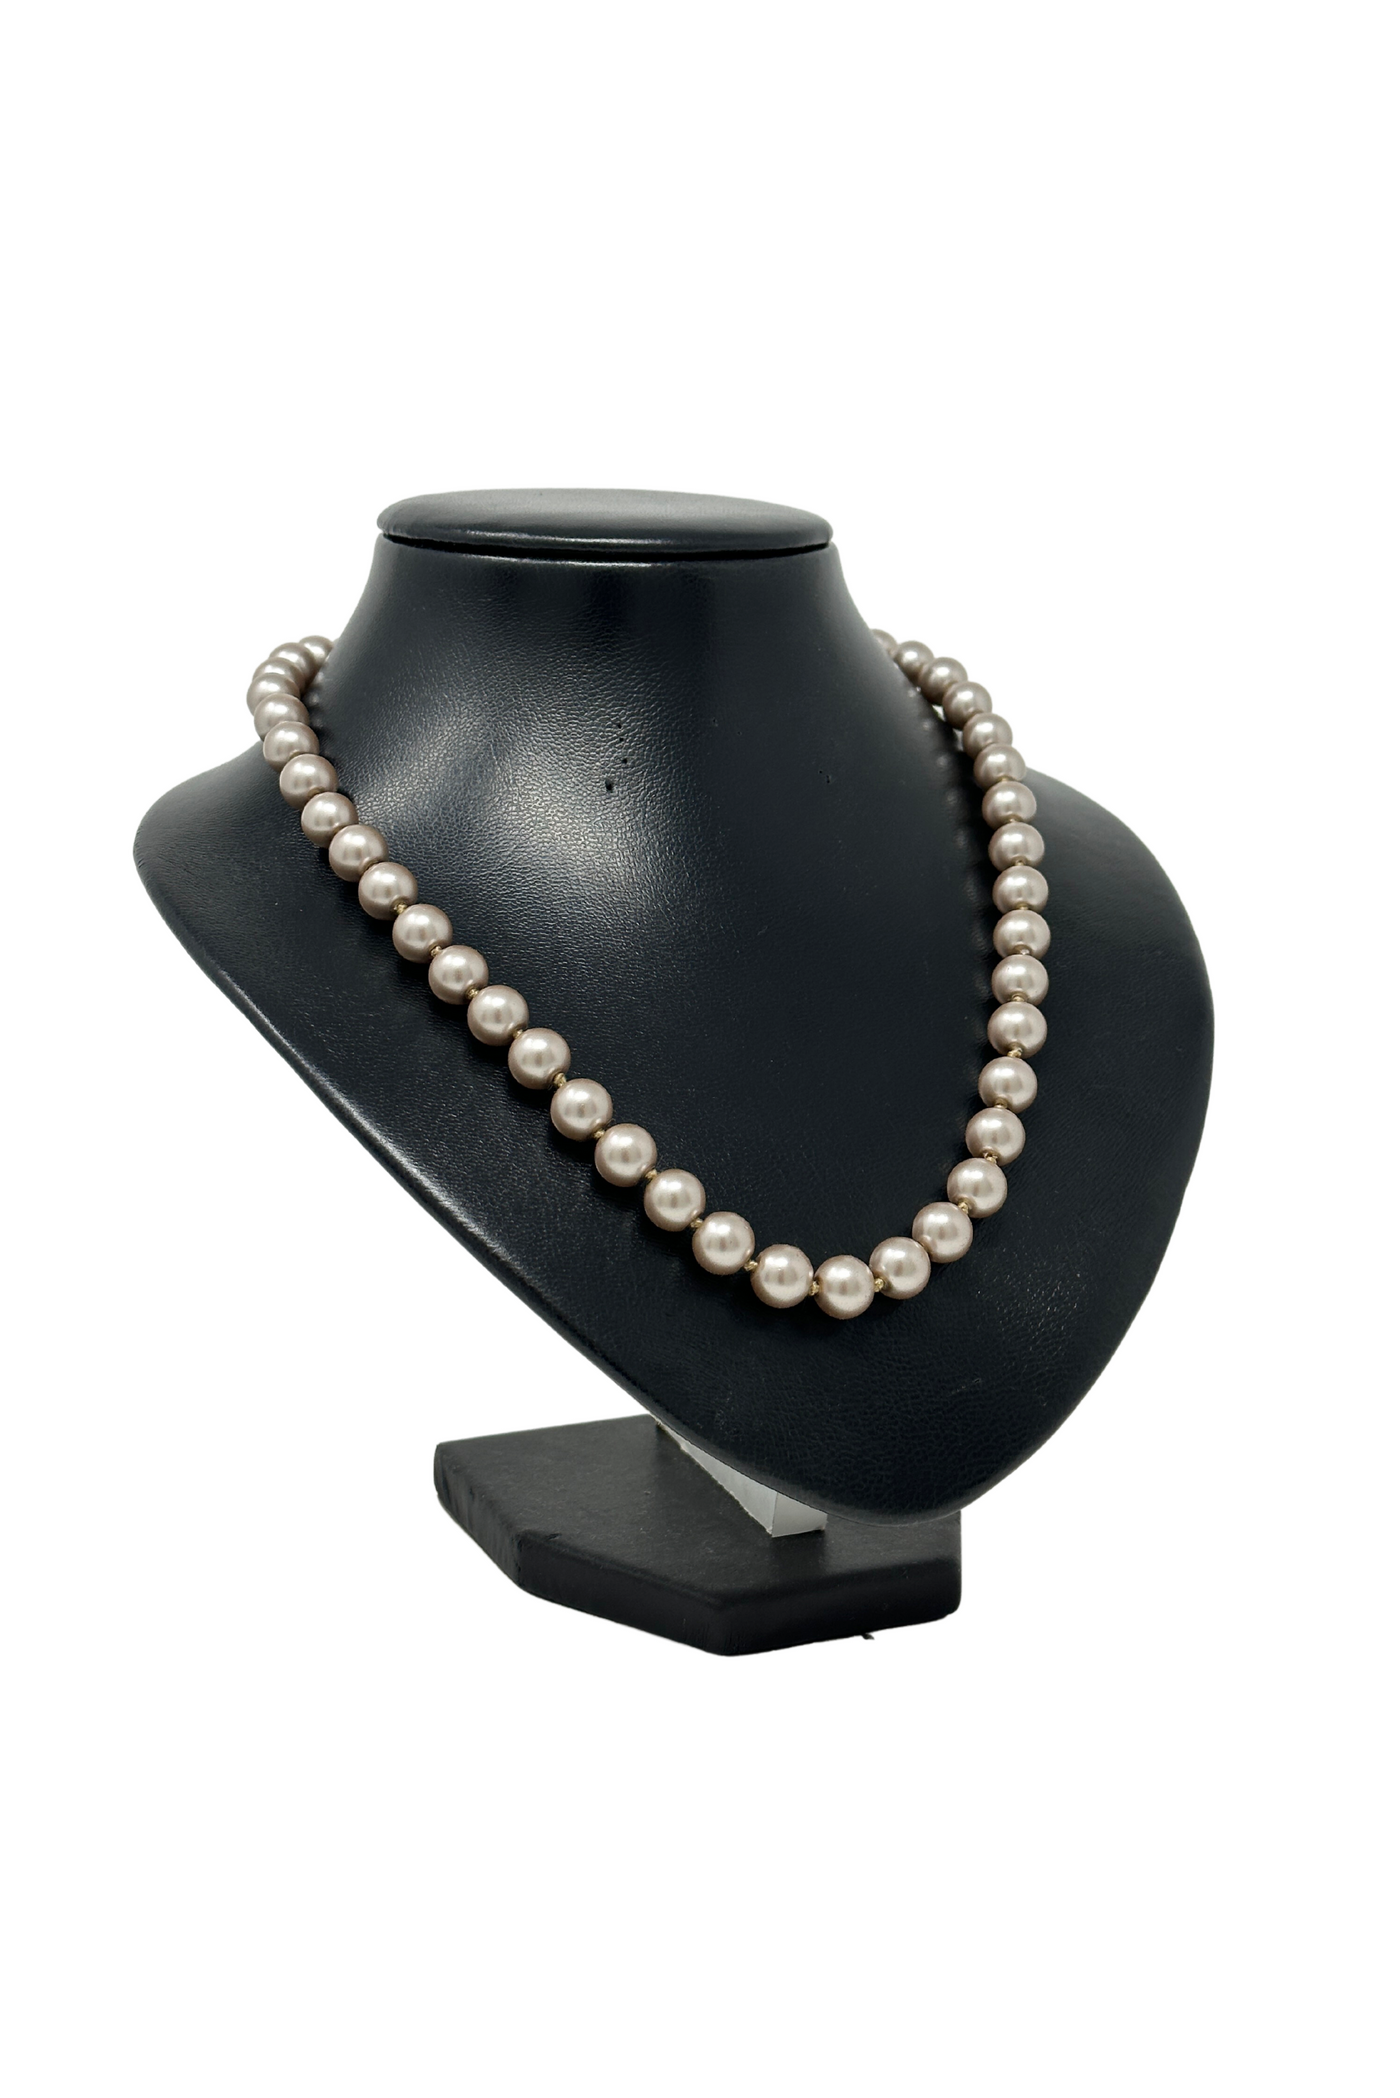 Gold Plated Necklace with Pearls